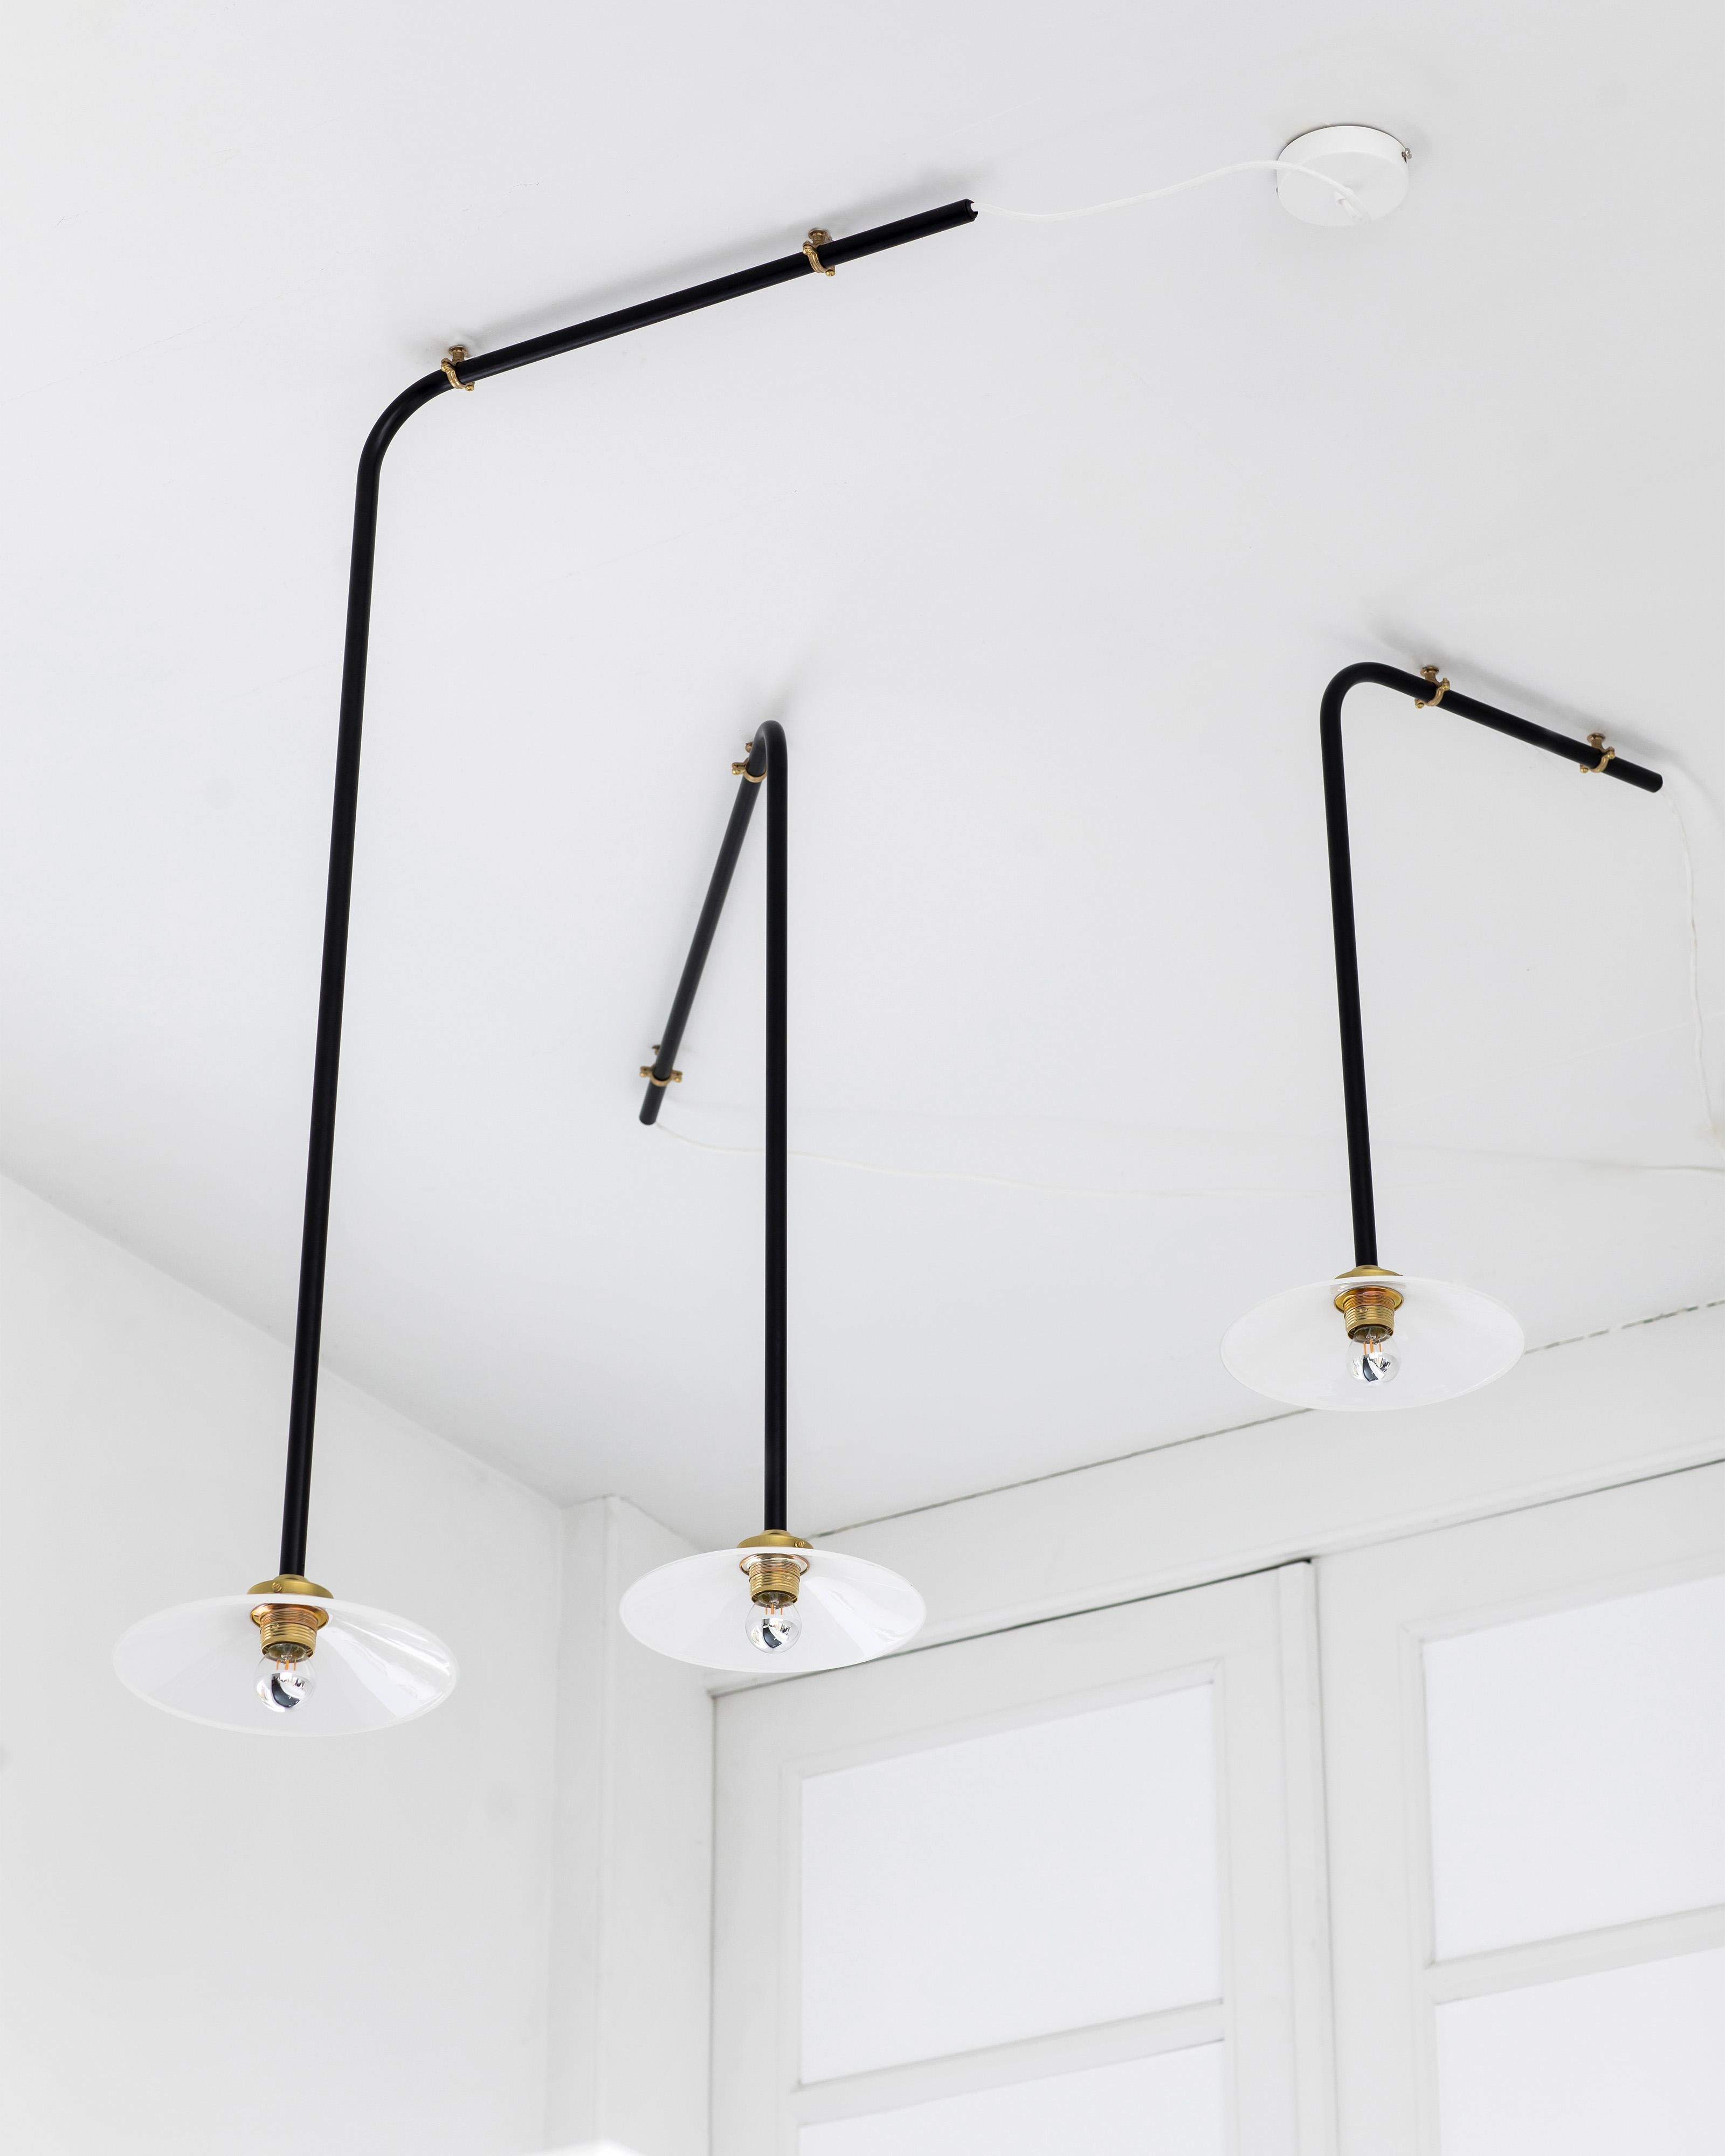 Cailing Lamp N°1 by Muller Van Severen x Valerie Objects

Dimensions: H. 140 X 183 X 25
Finish: Brass

specifications
fitting type: e27
bulb replaceable: yes
number of fittings: 1
dimmable: no
cable length: 3 meter
switch: no

material: 
— lamp